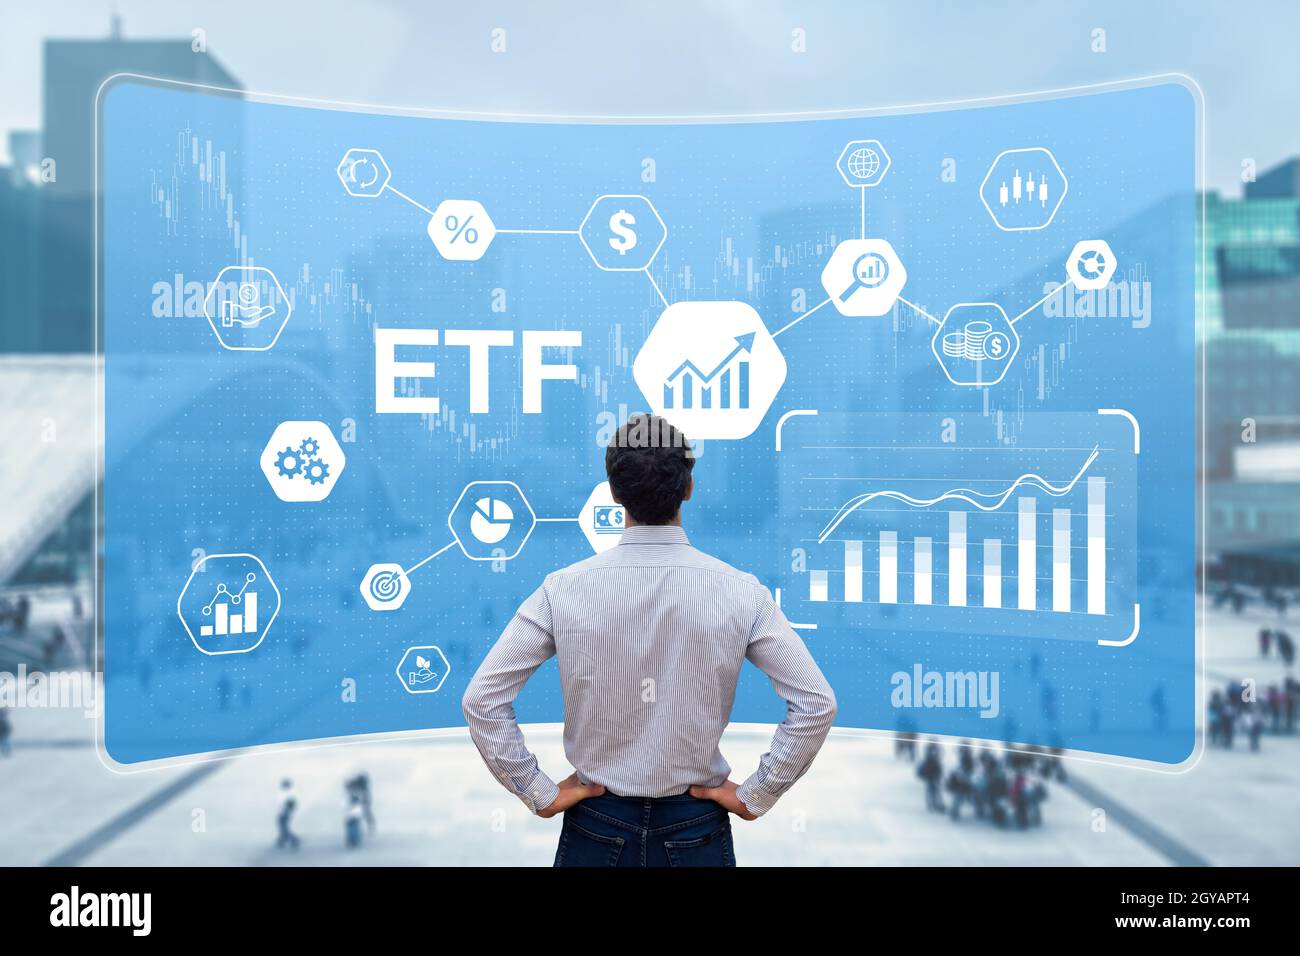 ETF Exchange-Traded Funds investment with investor building a portfolio of financial assets on market such as stock, bonds, commodities, currencies. C Stock Photo